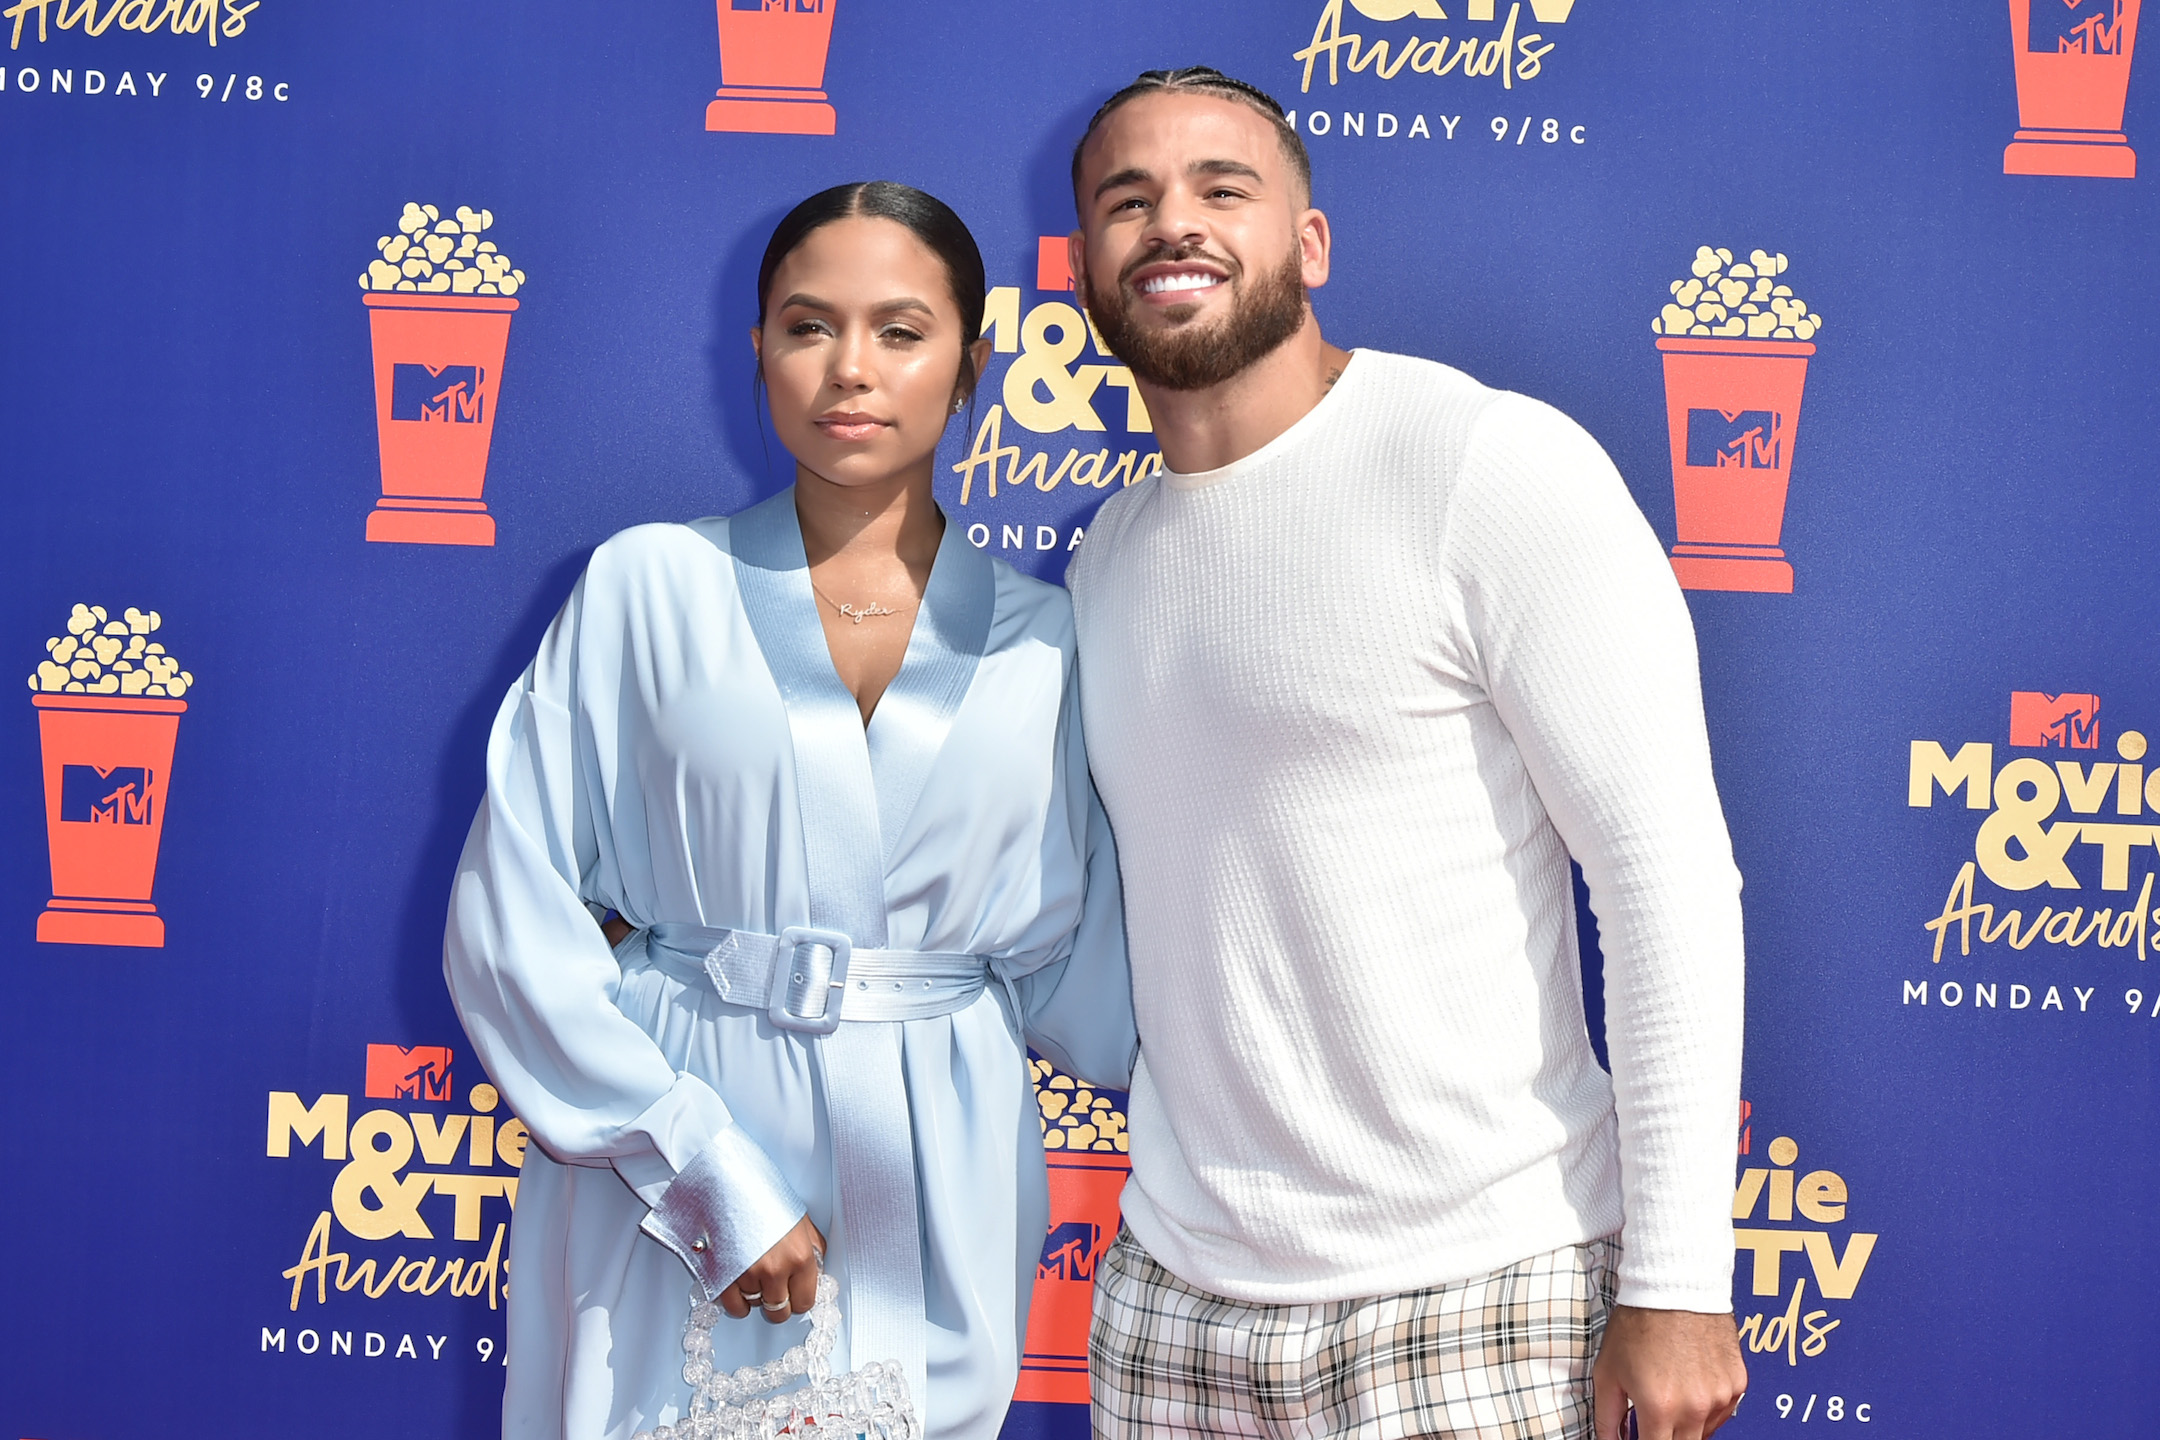 Cheyenne Floyd and Cory Wharton from MTV's 'The Challenge' standing together at the 2019 MTV Movie & TV Awards 